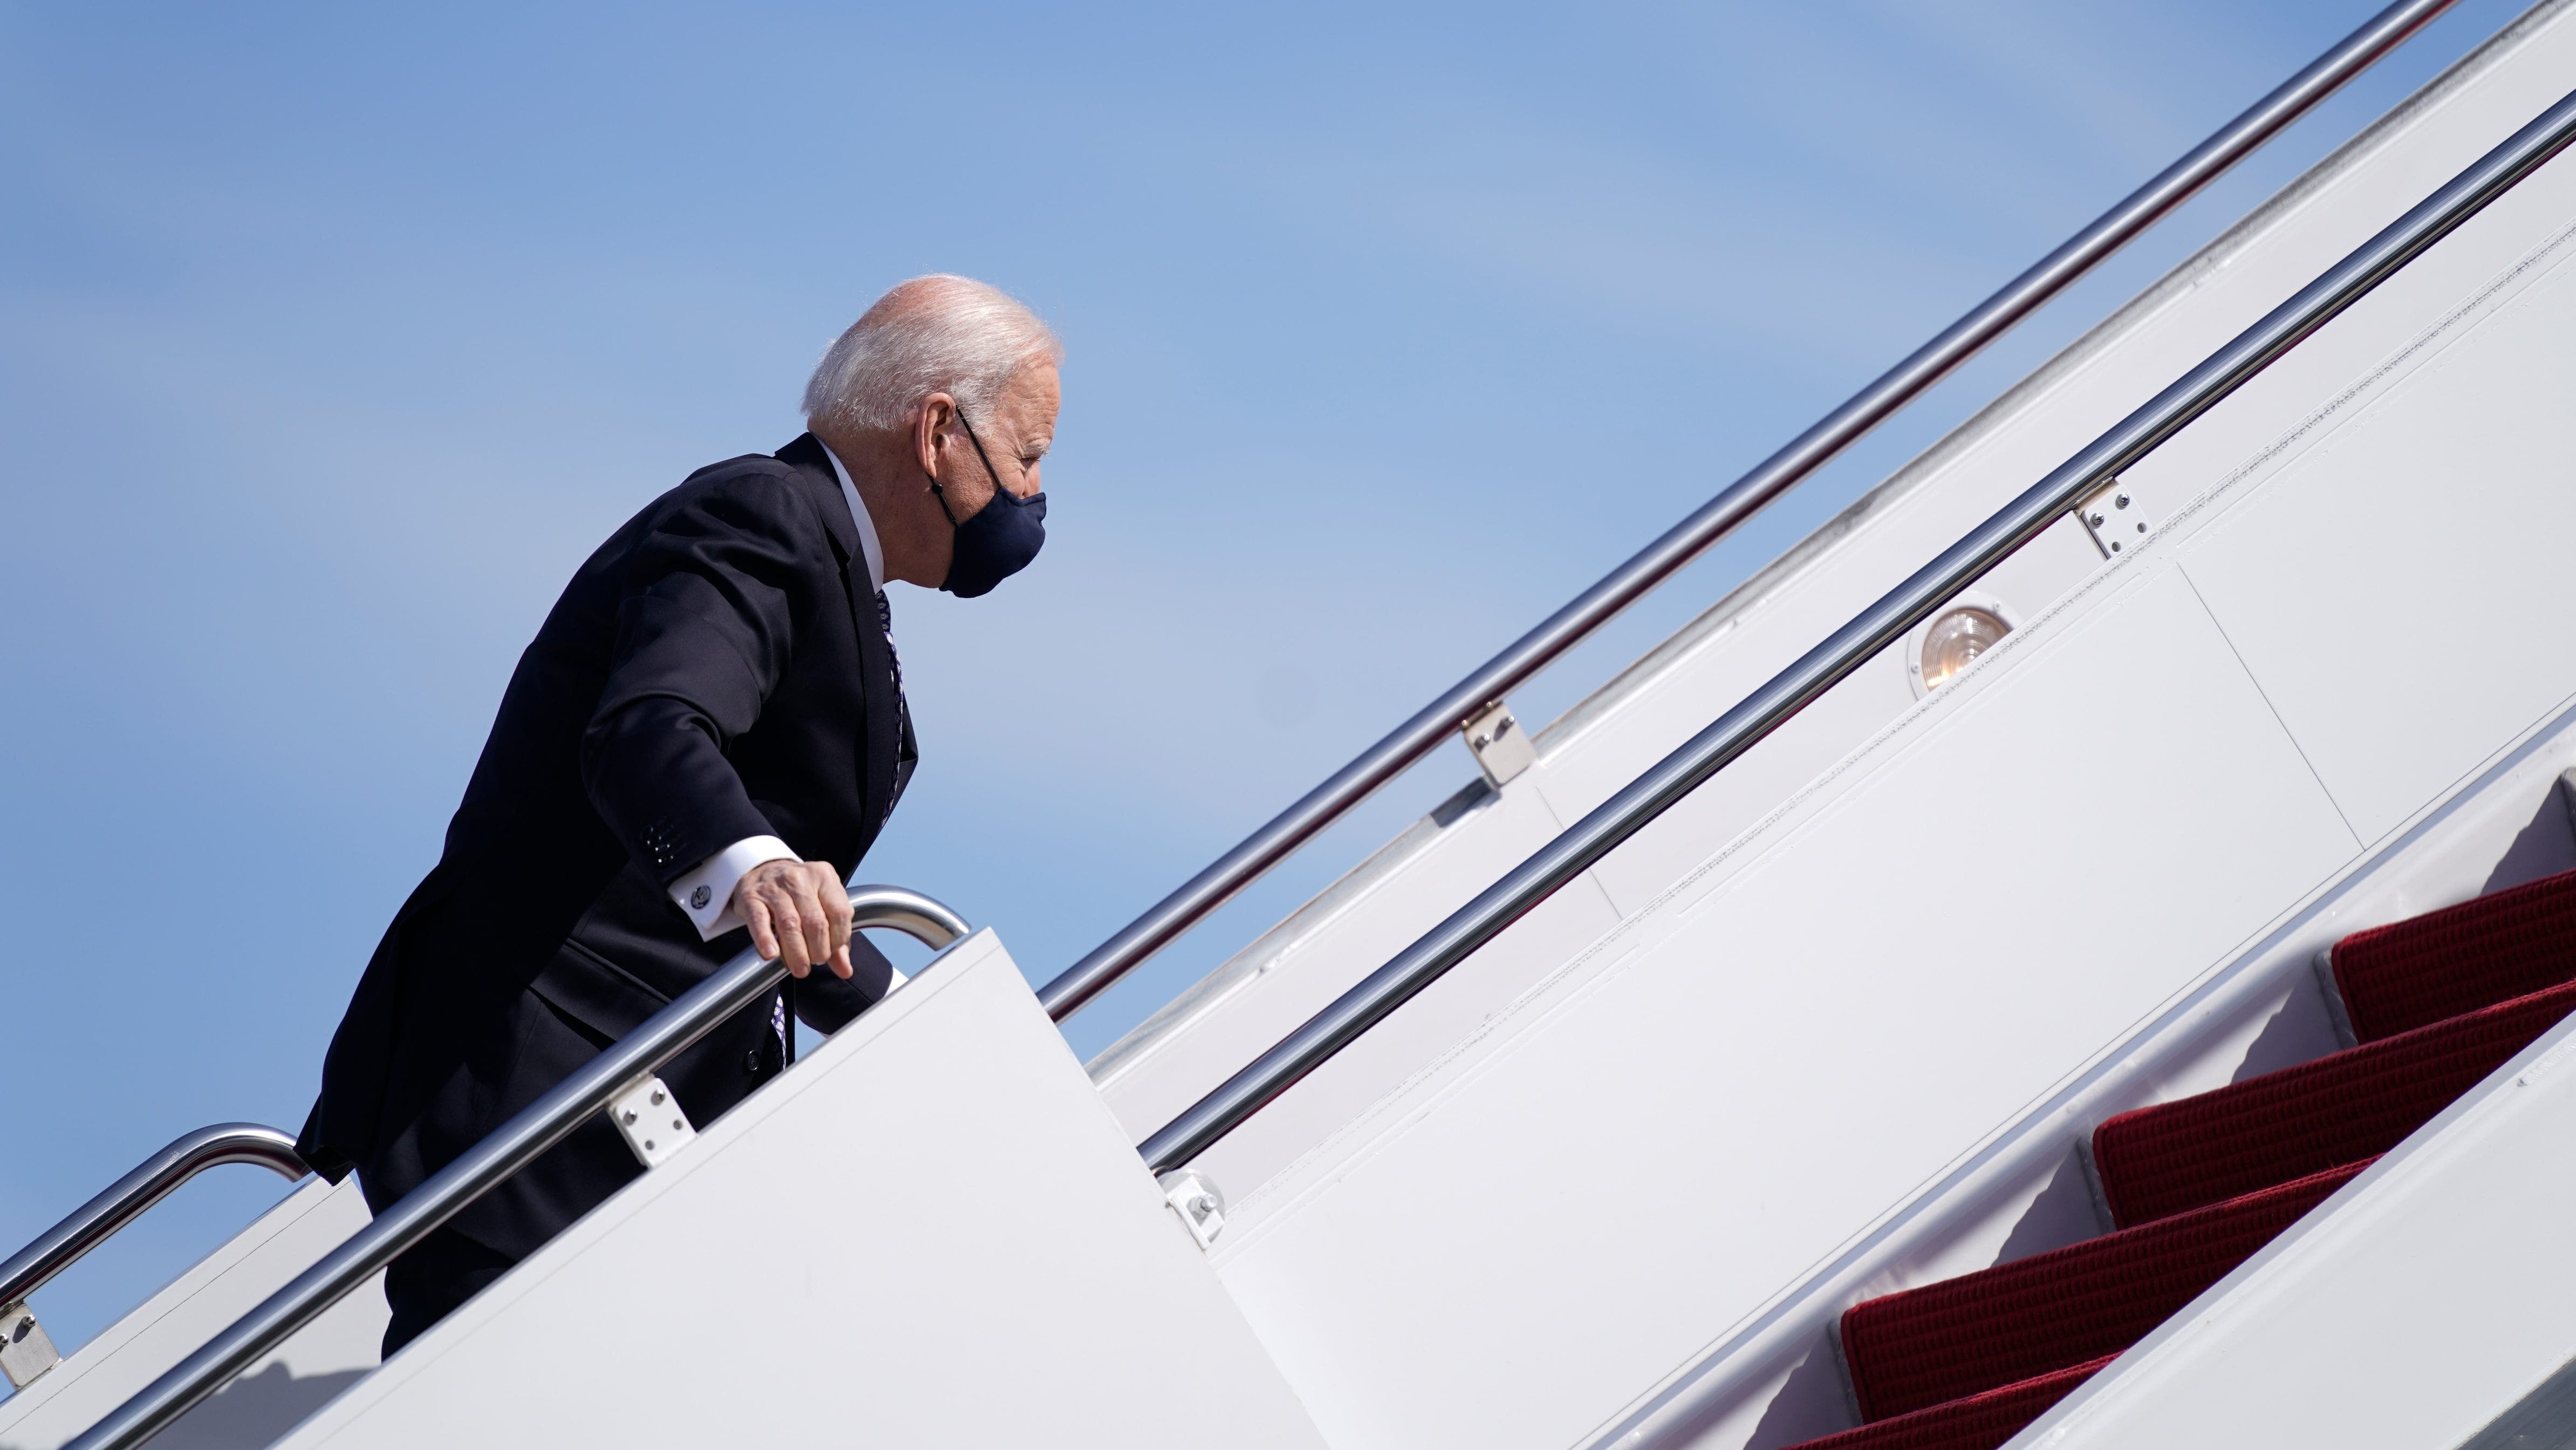 CNN and MSNBC exploded on Trump’s ramp – but pretty much ignored Biden’s stumble on the stairs